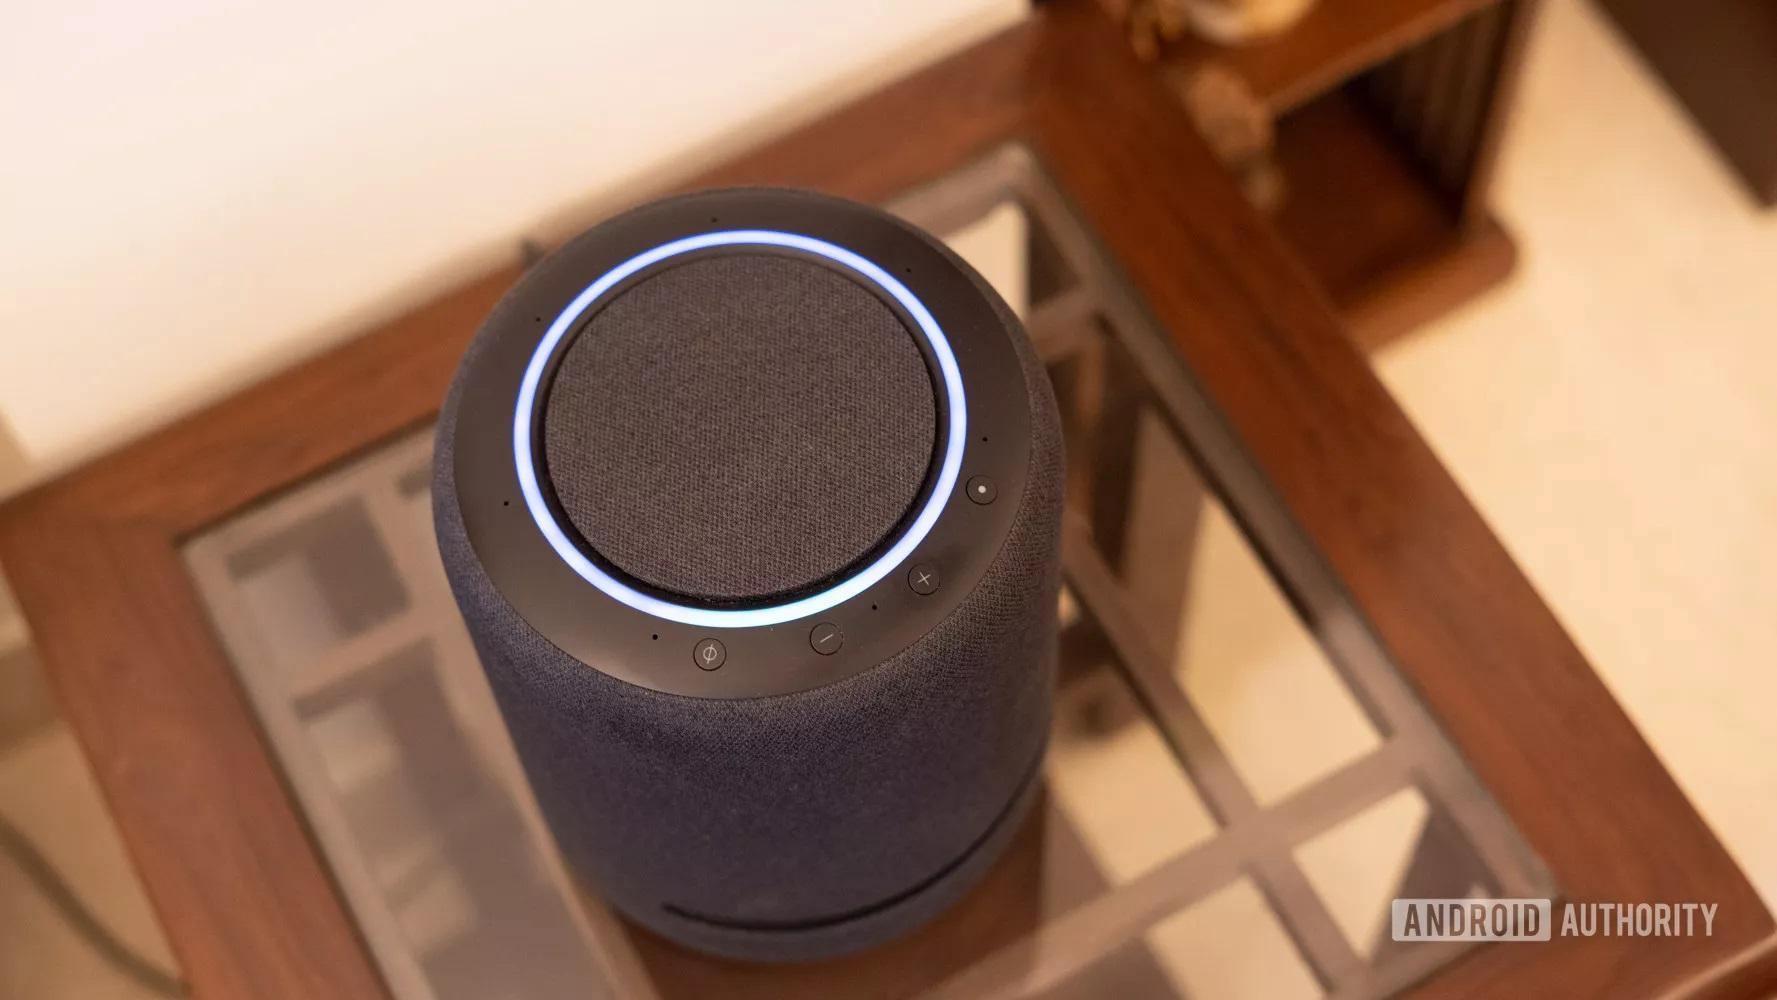 echo studio alexa speaker with light ring and control buttons